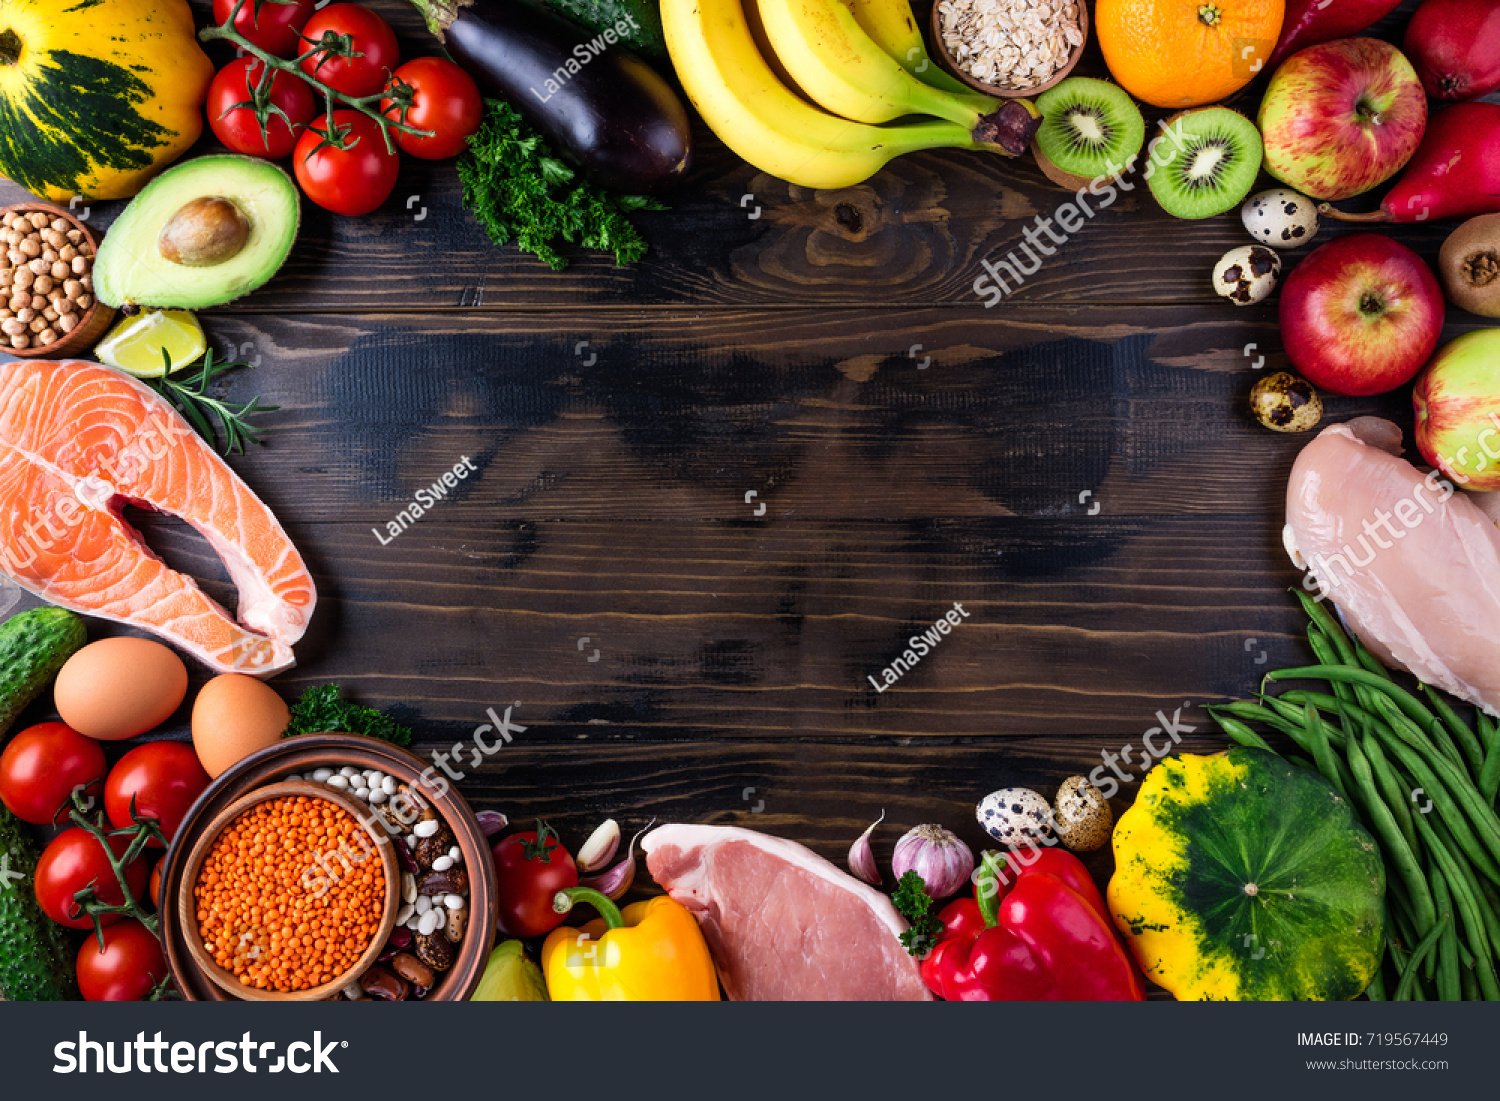 Selection of healthy food. Fresh organic vegetables, fruits, meat and fish. Healthy eating and healthy life concept. Top view, copy space #719567449